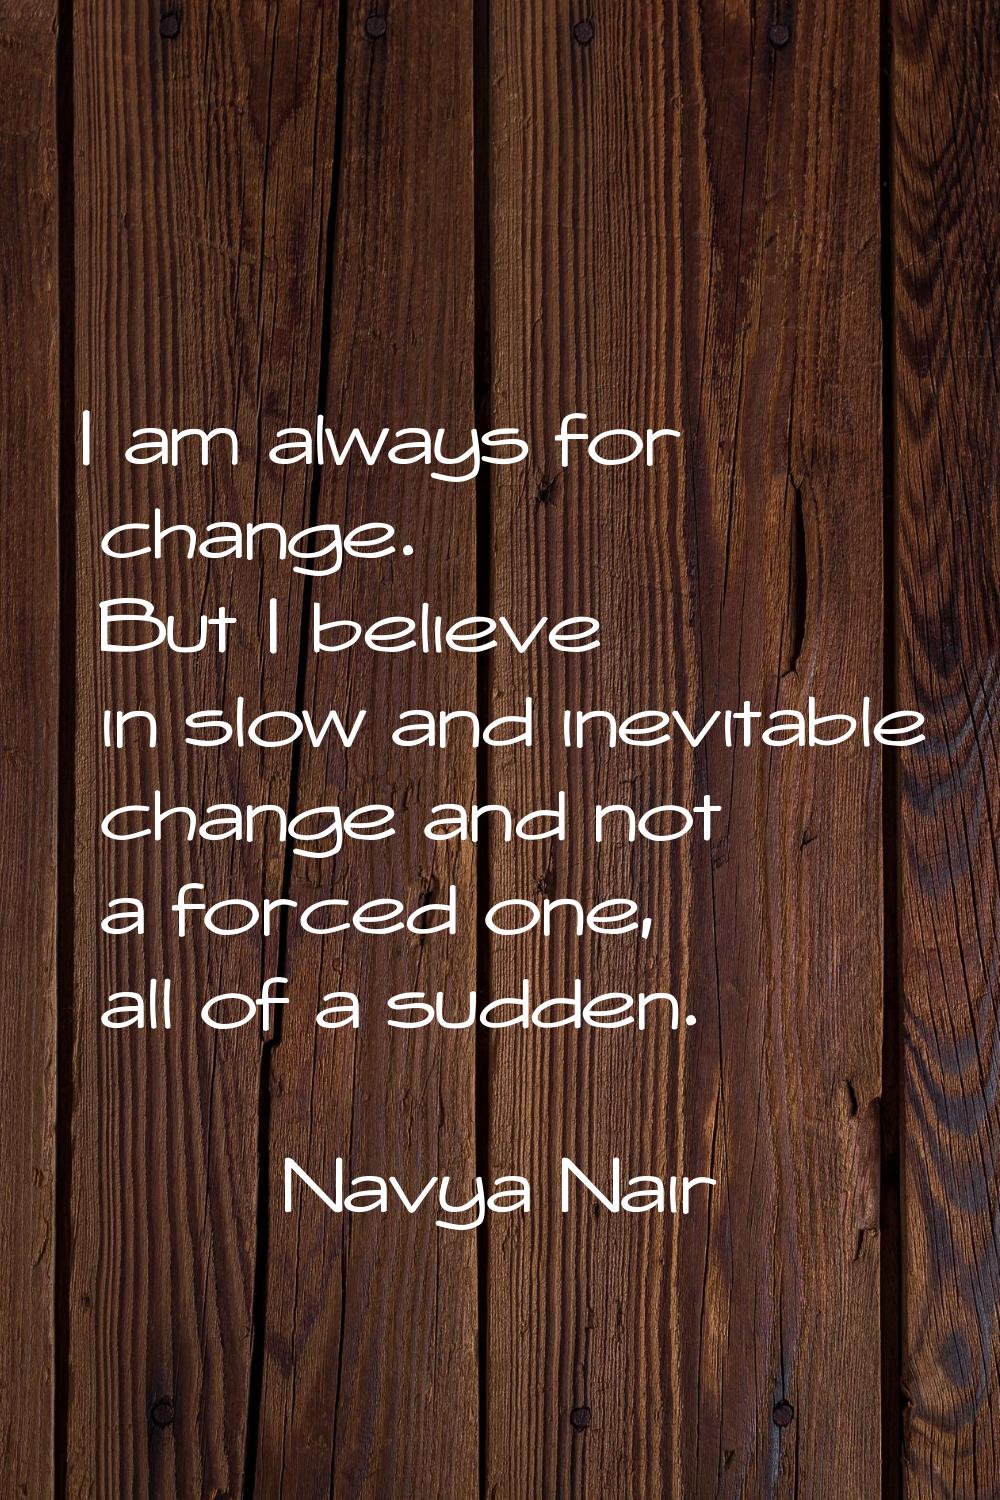 I am always for change. But I believe in slow and inevitable change and not a forced one, all of a 